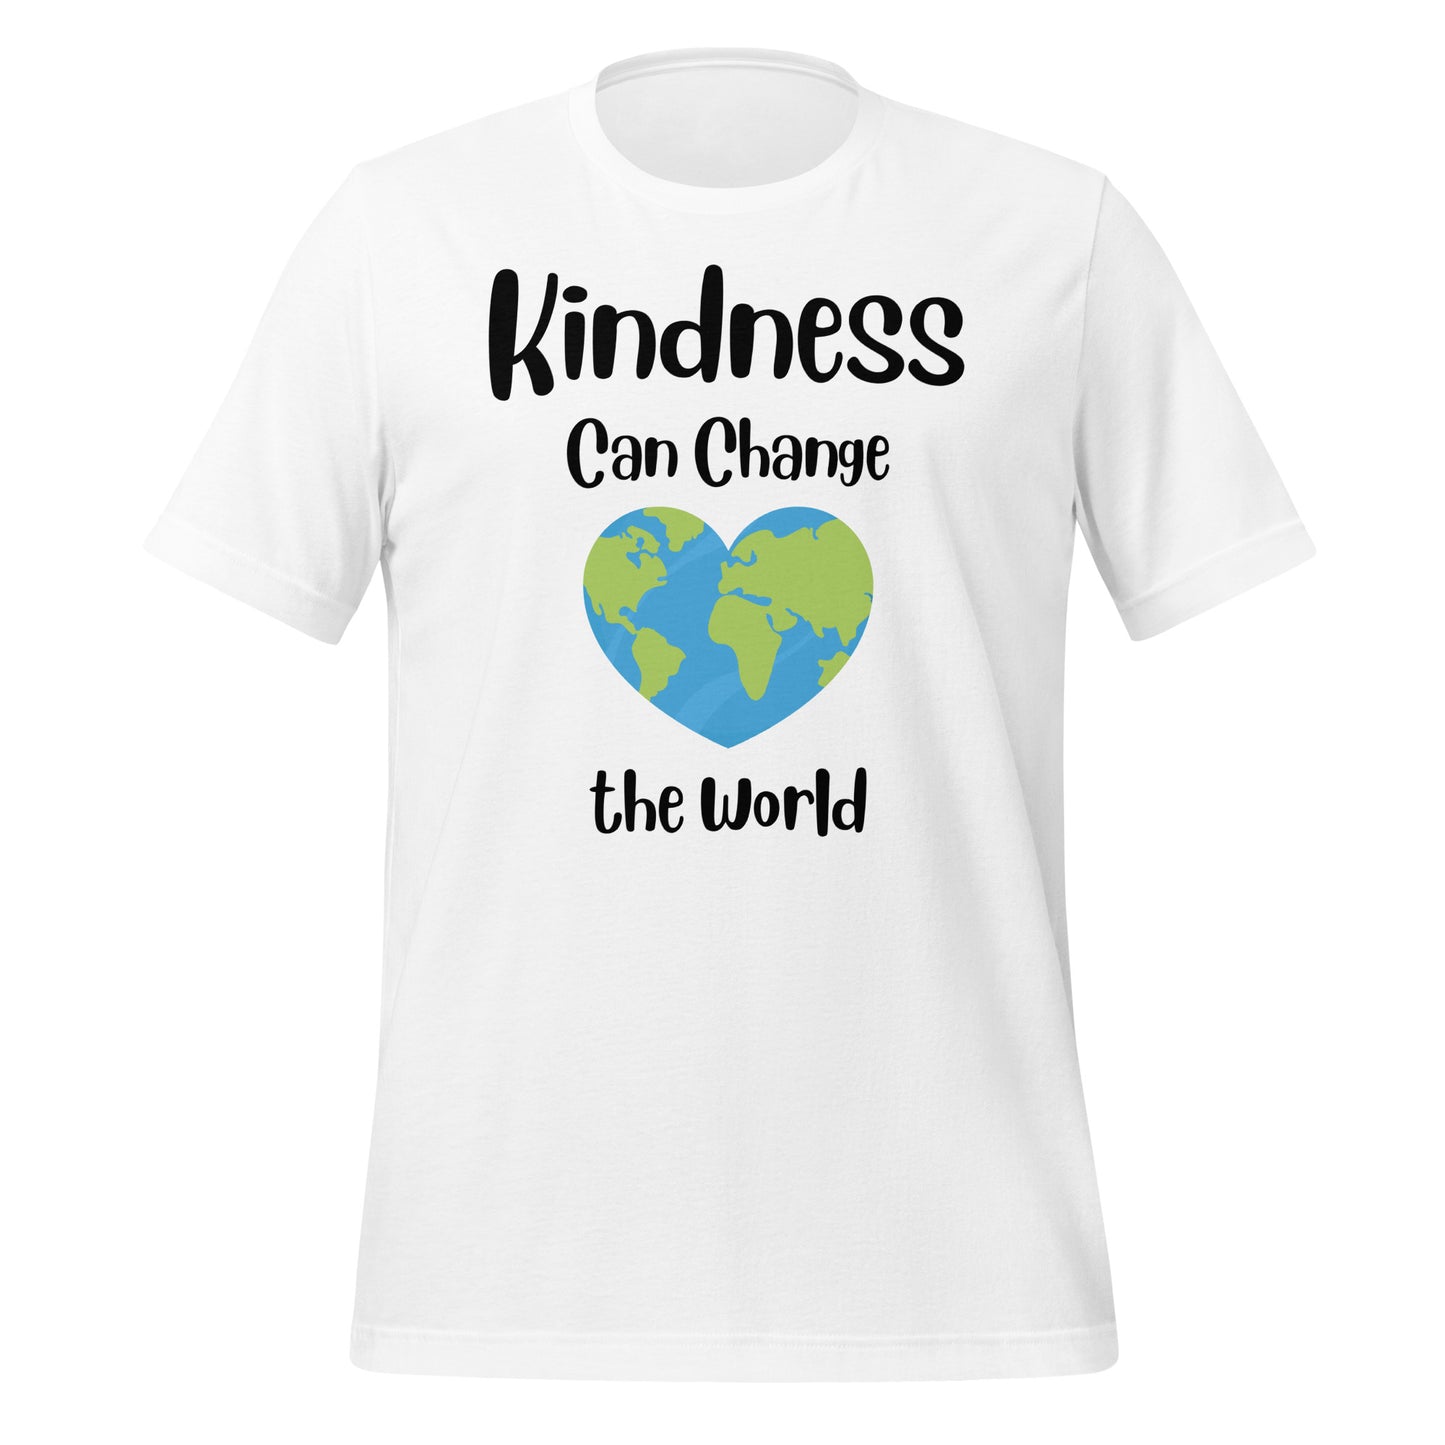 Kindness Can Change the World Quality Cotton Bella Canvas Adult T-Shirt